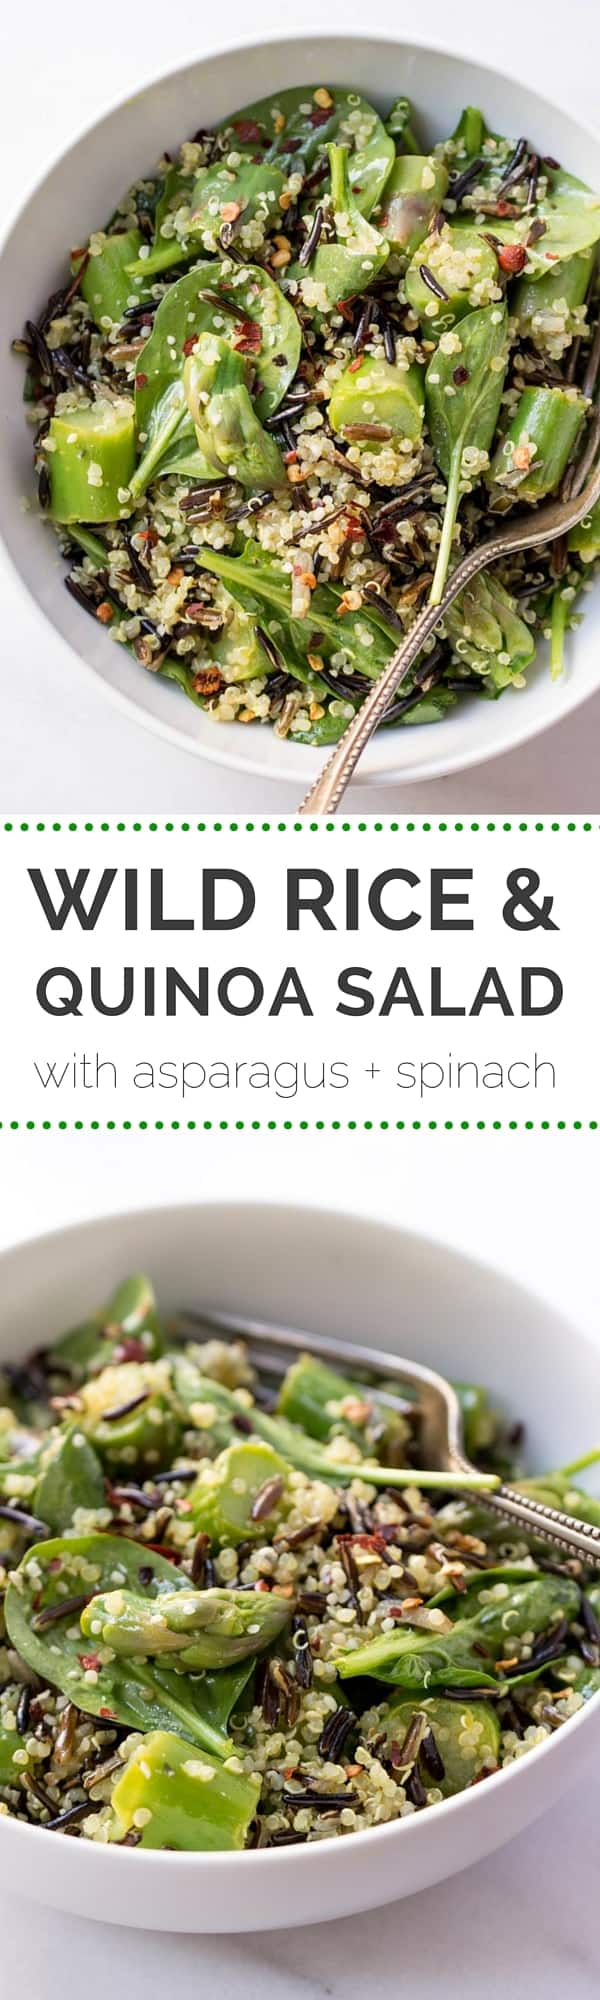 Wild Rice Quinoa Salad with asparagus and tossed in a lemon-turmeric vinaigrette - simple, healthy and super refreshing!